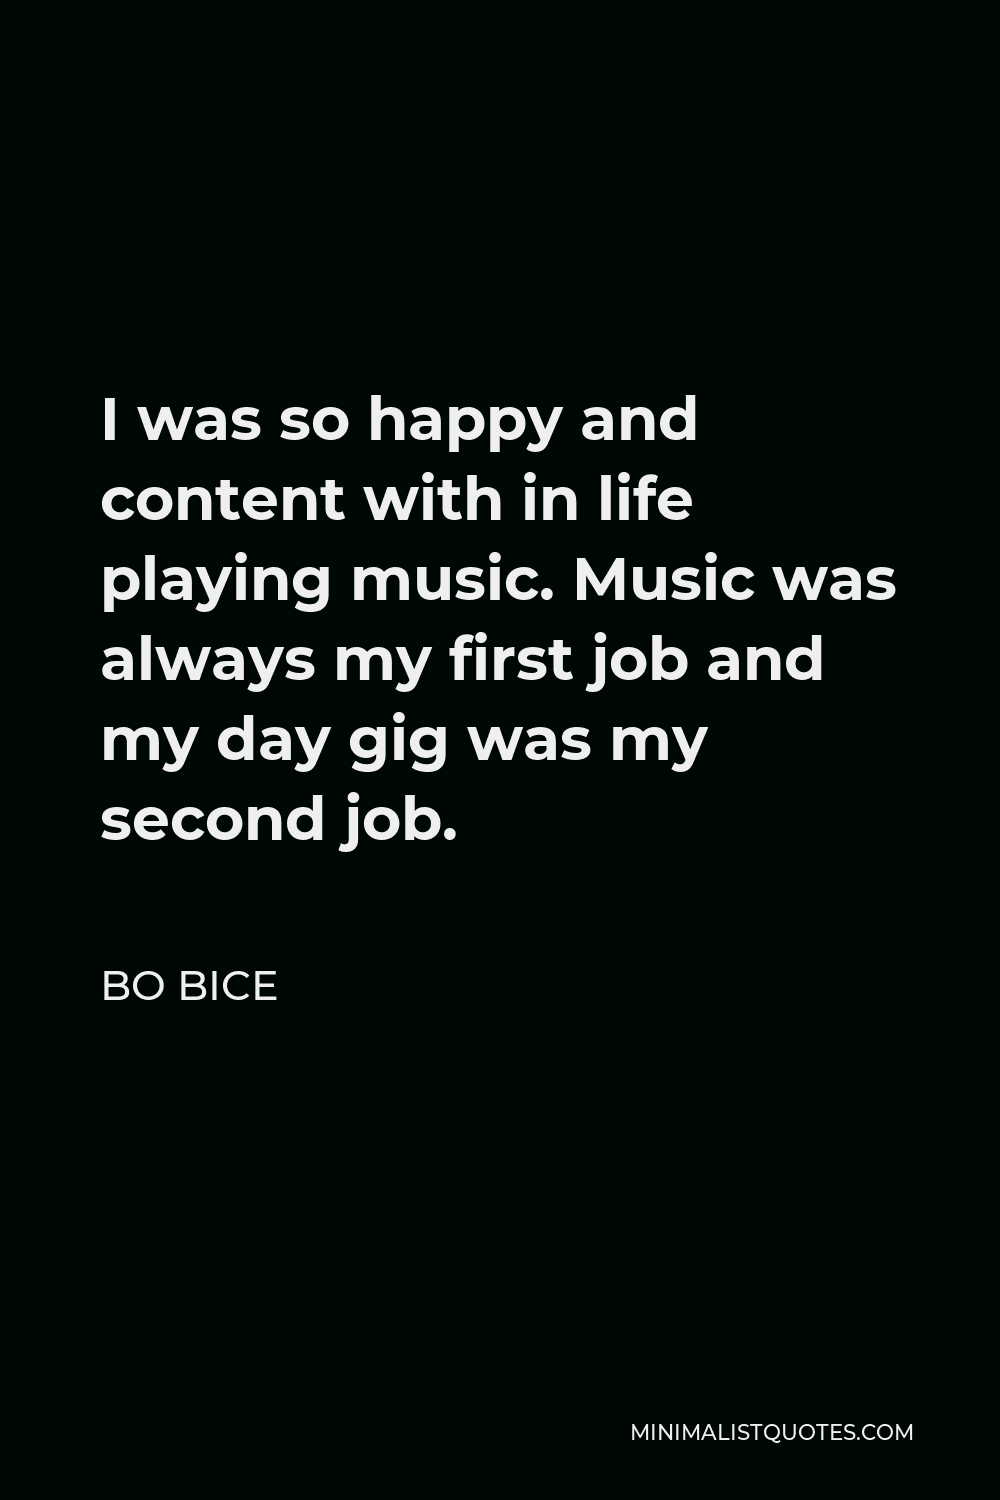 Bo Bice Quote - I was so happy and content with in life playing music. Music was always my first job and my day gig was my second job.